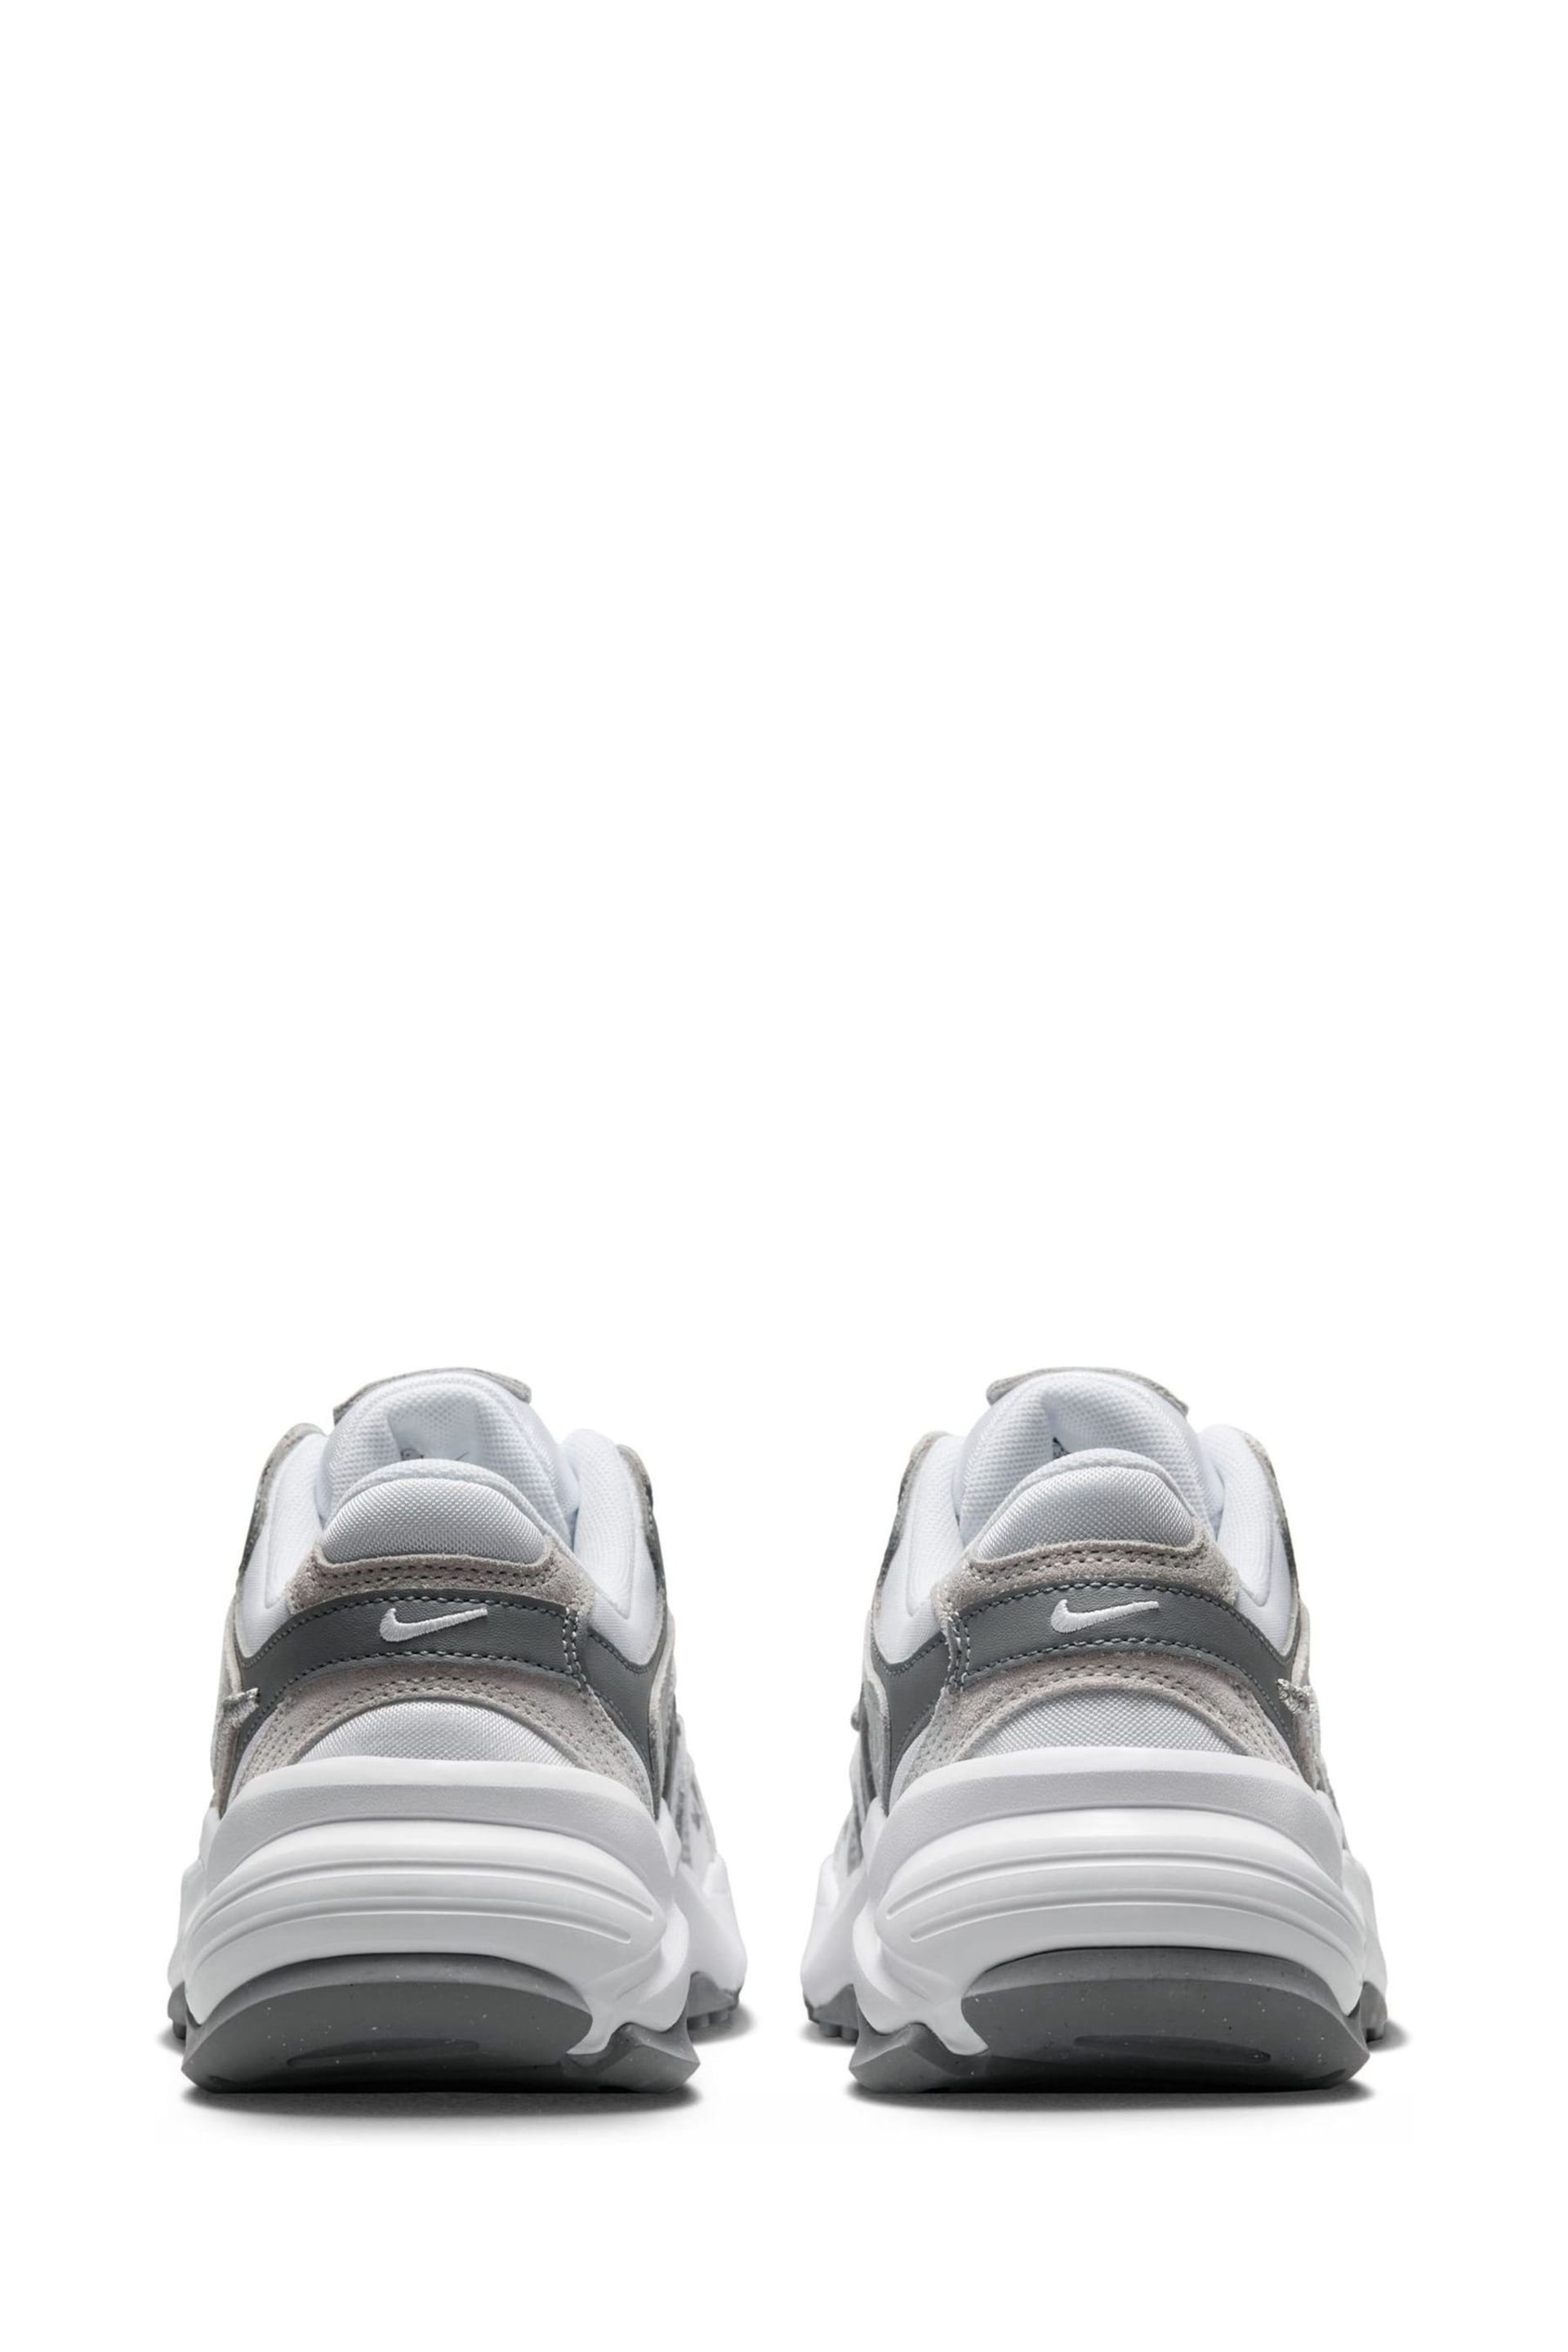 Nike Grey/White AL8 Running Trainers - Image 8 of 13